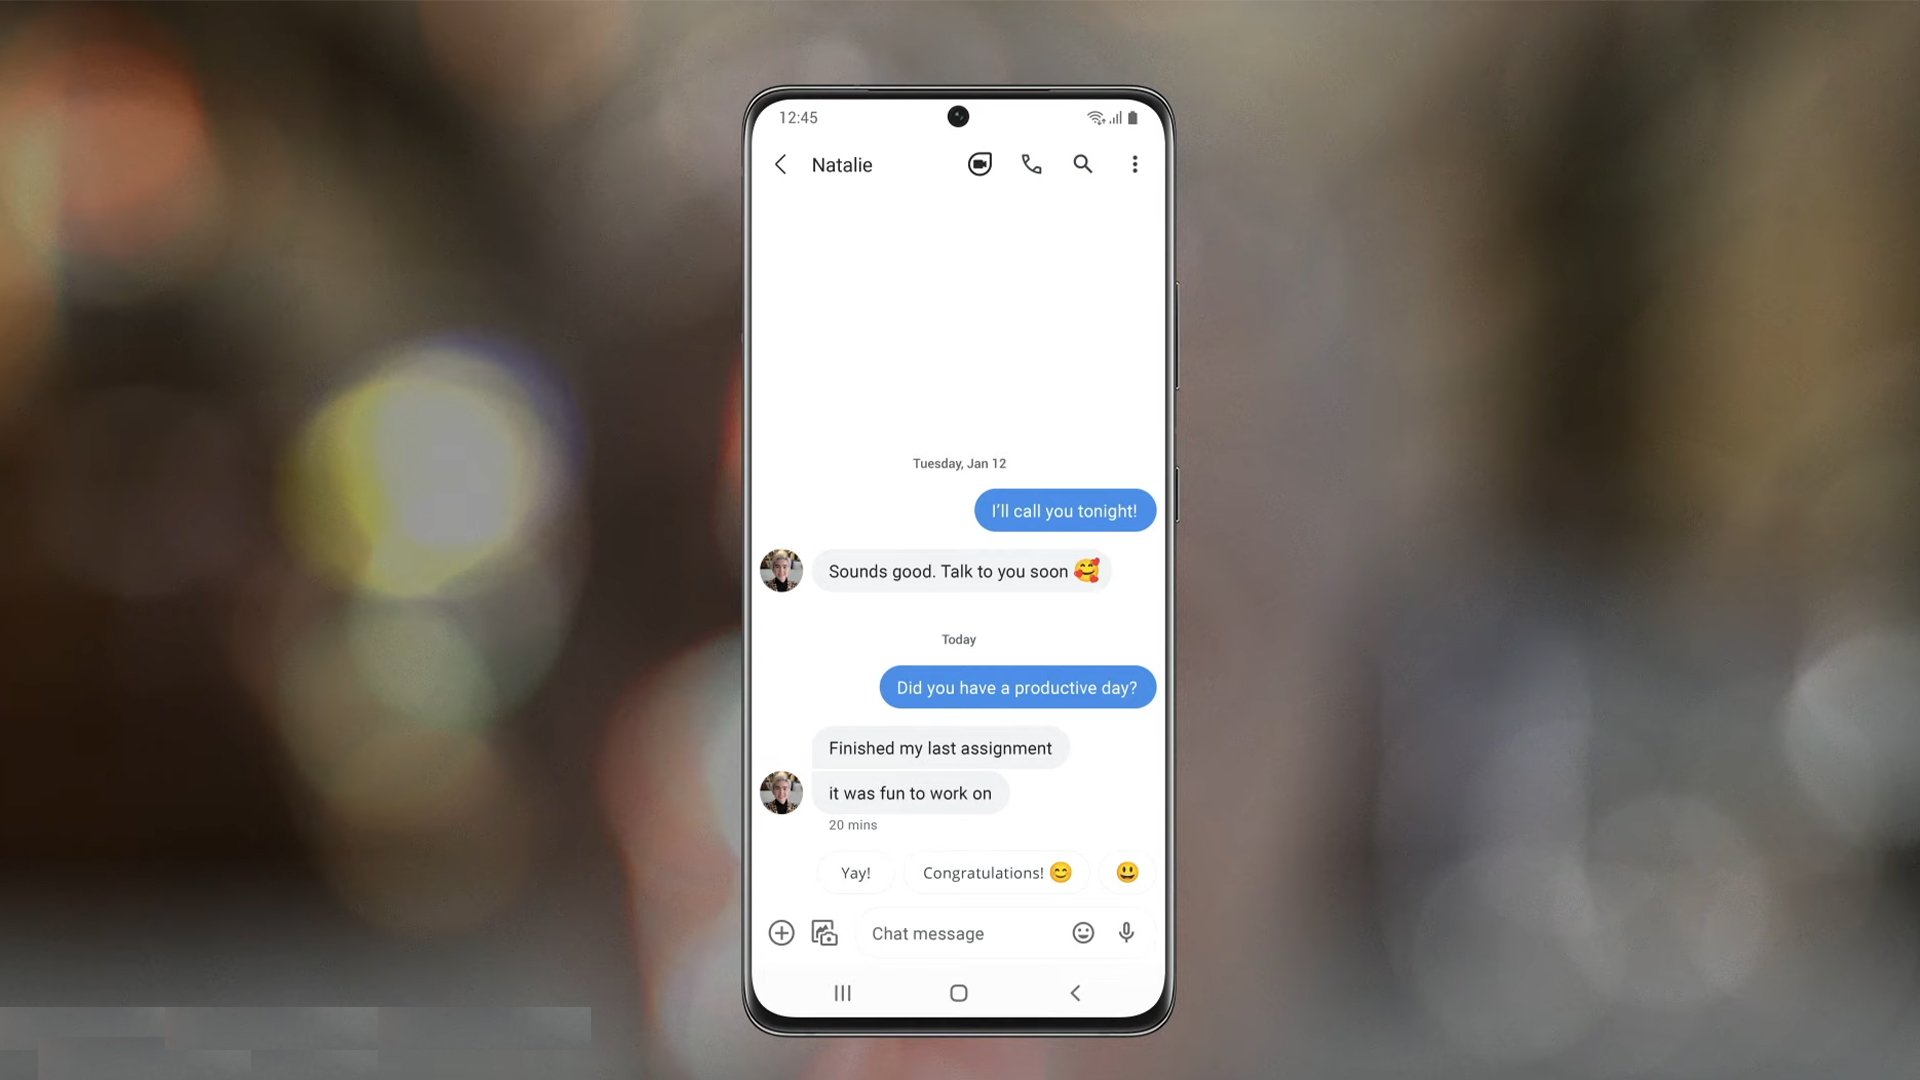 Your Samsung smartphone could soon display iMessage reactions properly - SamMobile